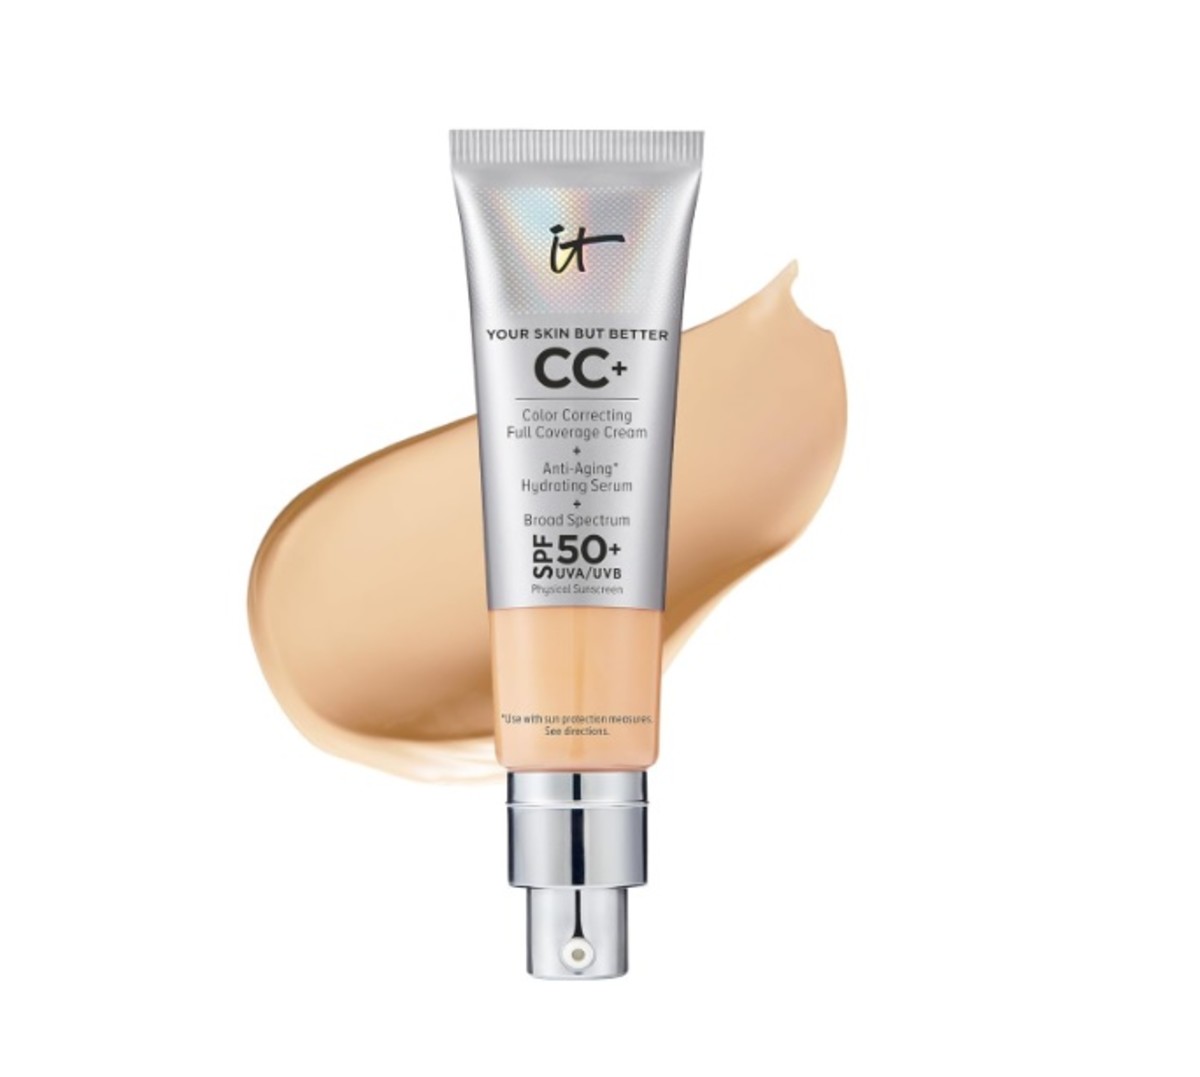 IT cosmetics Your Skin but Better CC+ Full coverage Foundation